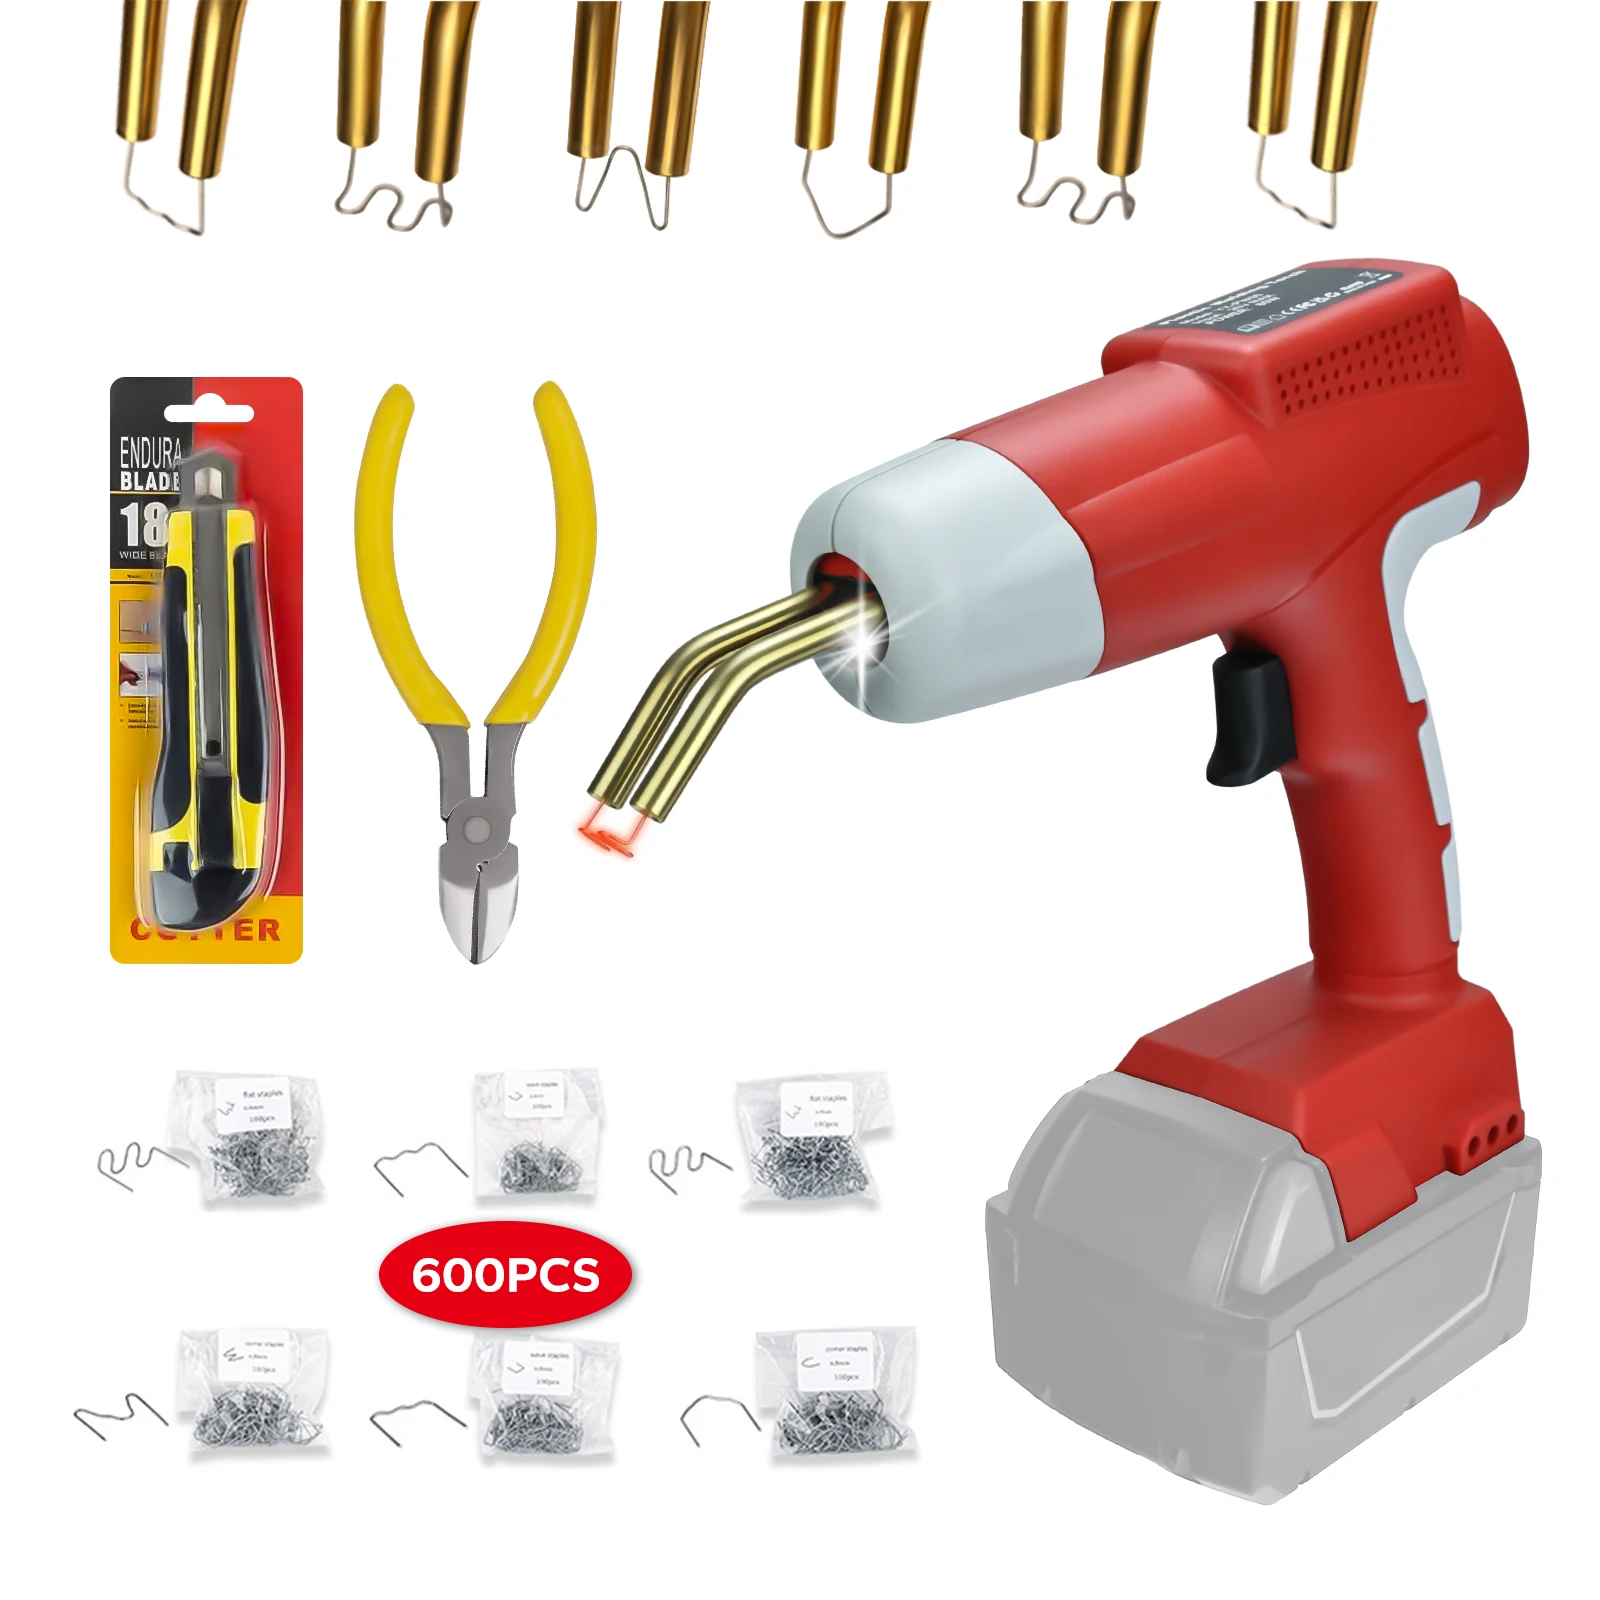 80W Plastic Welding Gun with 600pcs Nails Car Repair Nail Welding Wire Tool Welder Torch Kit for Milwaukee 18-20V Li-ion Battery 80w plastic welder torch kit welding gun with 600pcs nails car repair nail welding wire tool for dewalt 20v max li ion battery